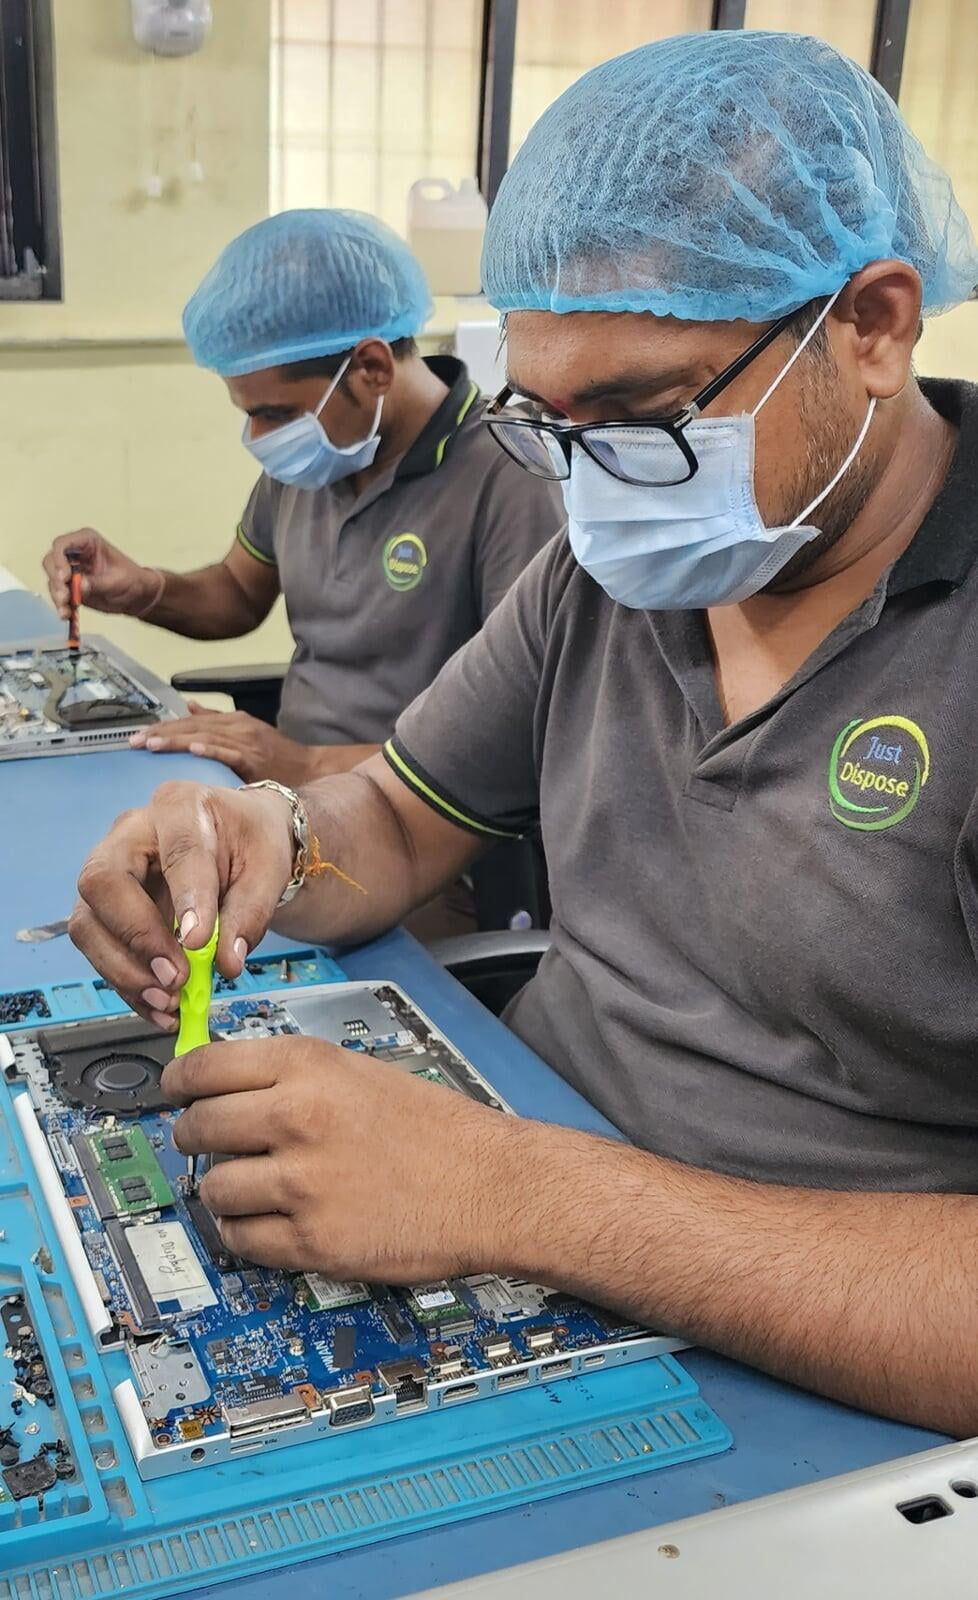 Engineers repairing laptops at Justdispose. Expert ITAD and e-waste recycling services for a sustainable future.